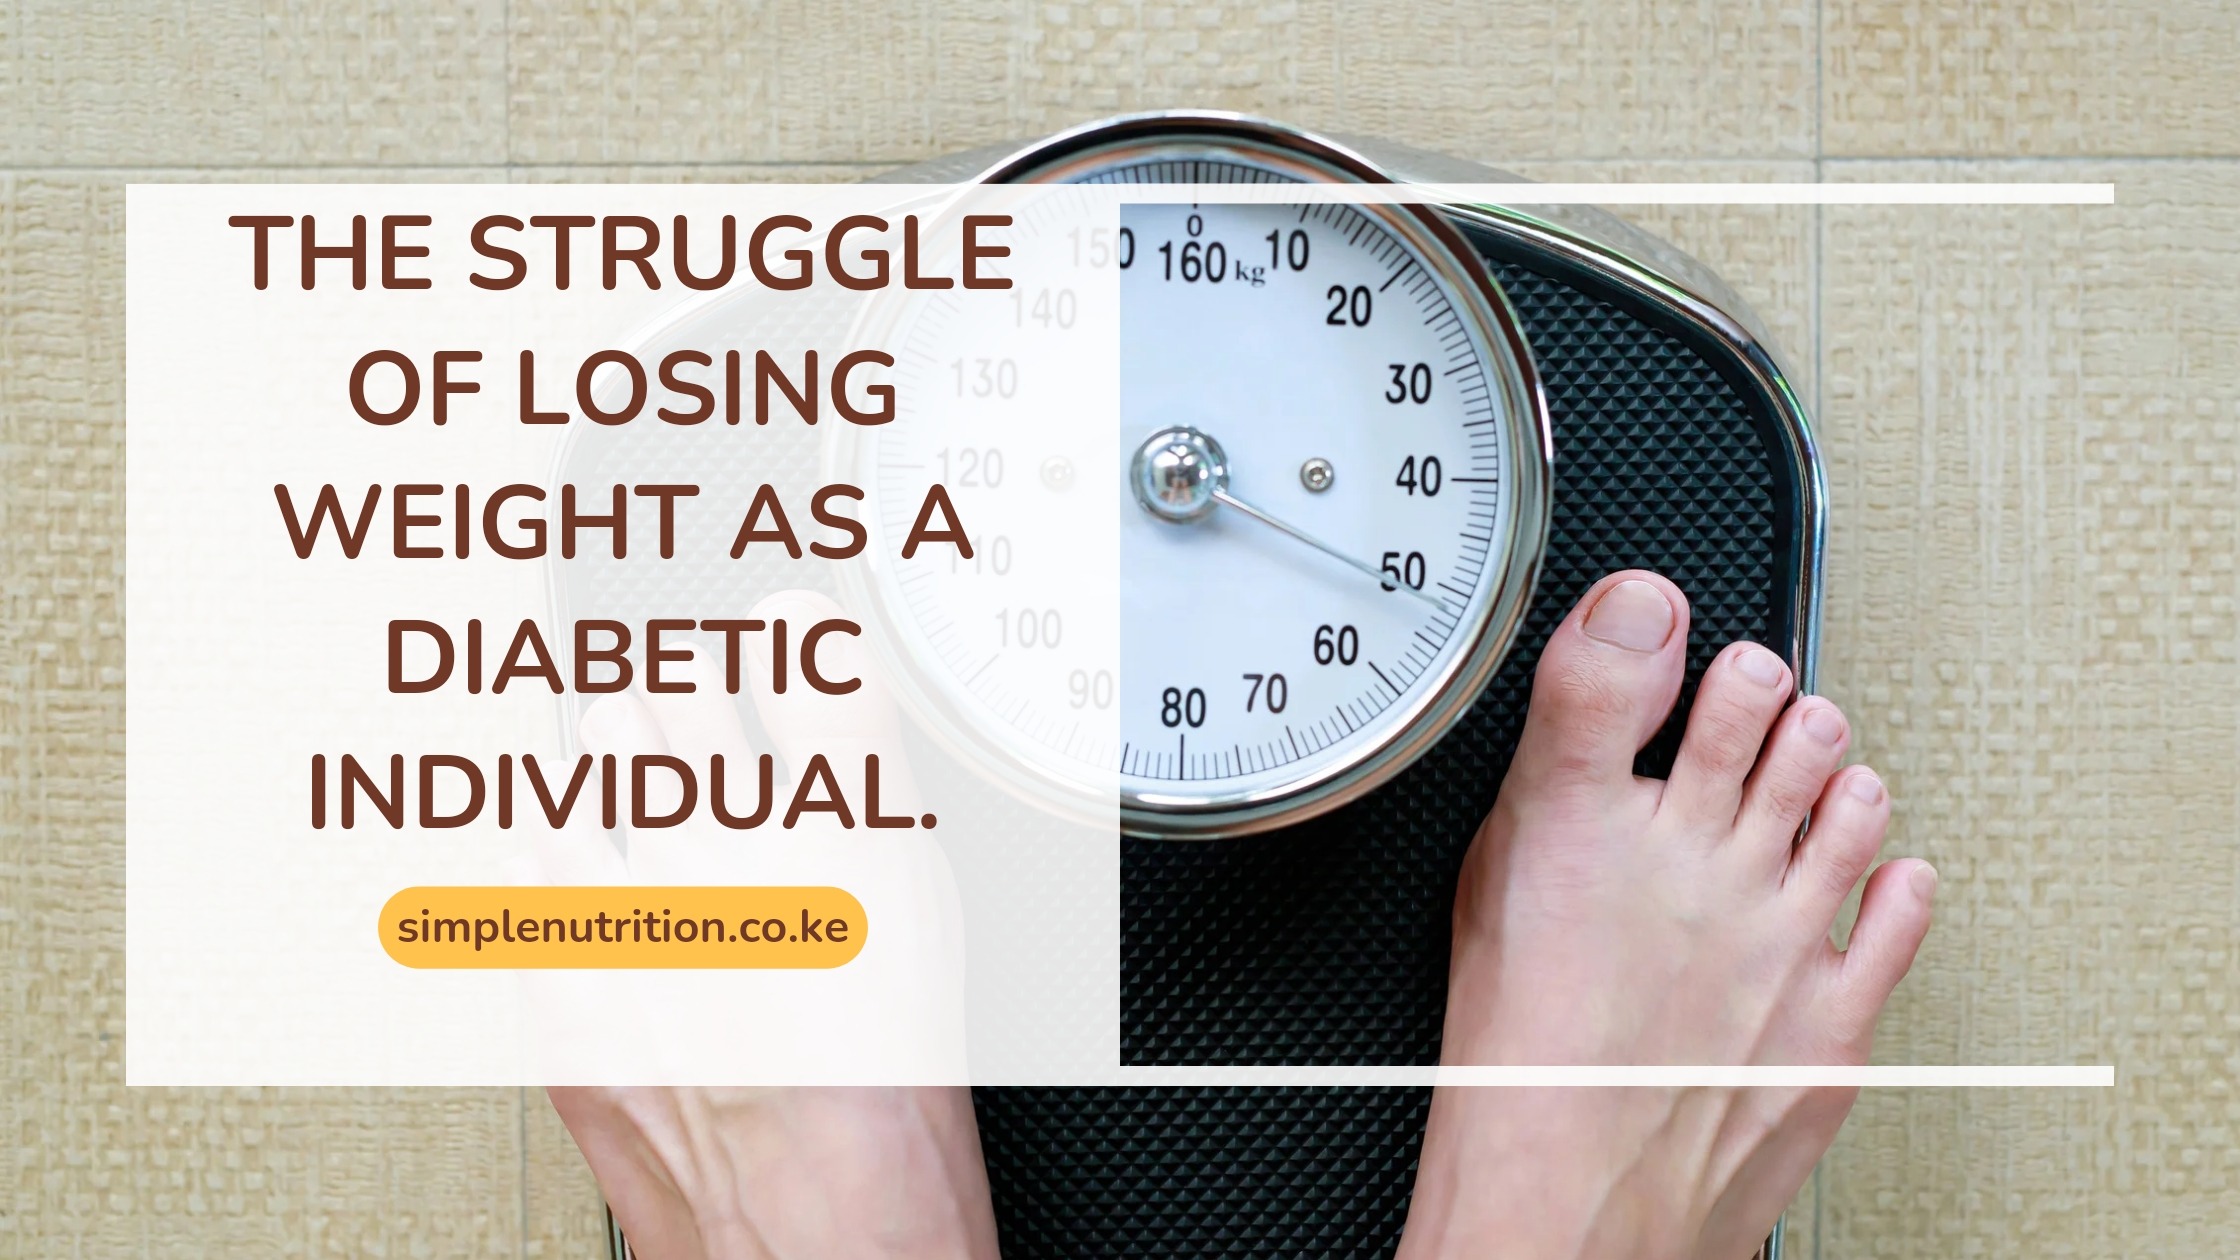 Weight loss: How to lose weight as a Diabetic individual.